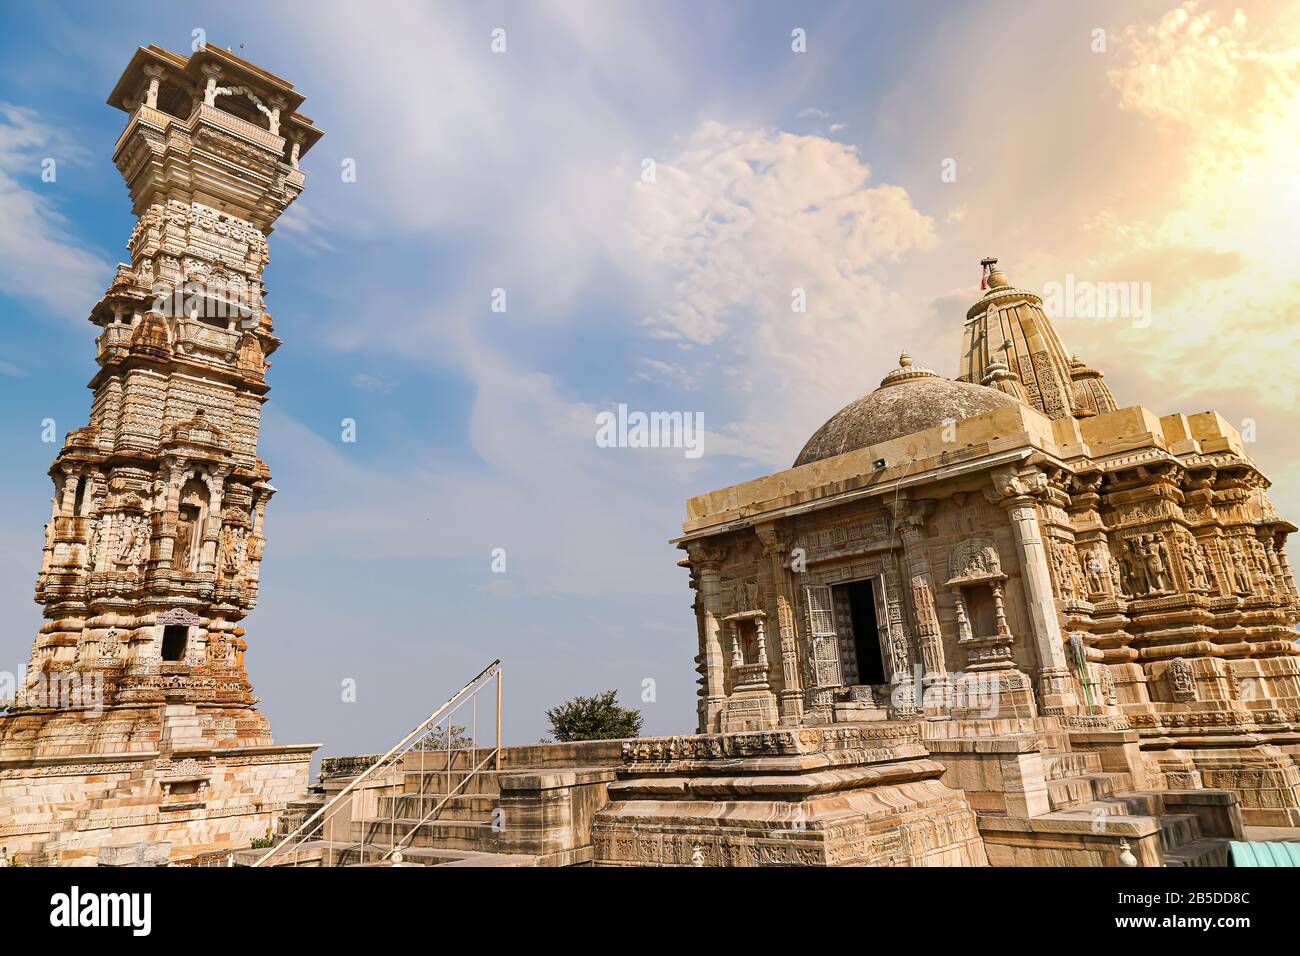 Chittorgarh Fort ancient architecture the Kirti Stambha and Kali Mata  temple at sunset. Chittor Fort is a UNESCO World Heritage site Stock Photo  - Alamy